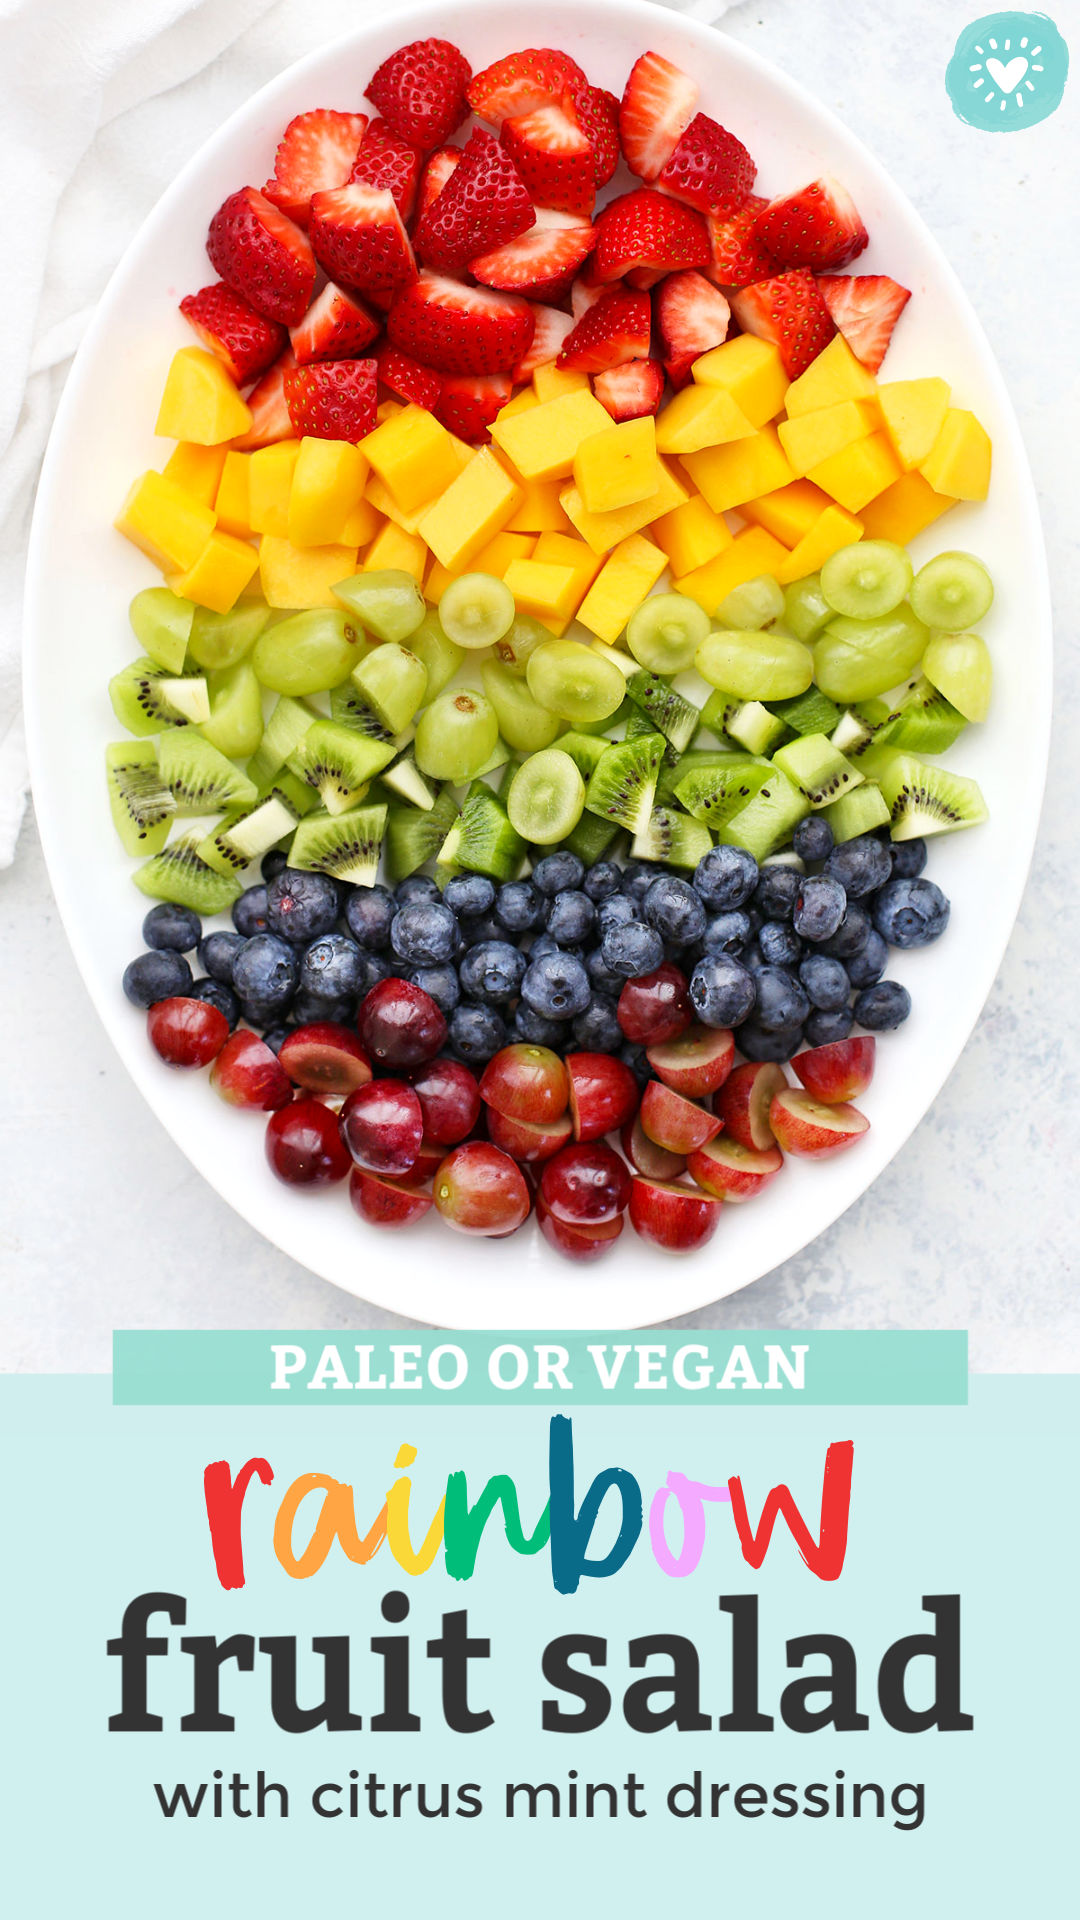 The Best Rainbow Fruit Salad with Citrus Mint Dressing - This rainbow fruit salad is always a favorite with kids and grown-ups. Perfect for picnics, potlucks, brunches, barbecues, and more! (Gluten free, paleo & vegan friendly) // rainbow fruit salad // honey mint dressing // citrus mint dressing recipe // fruit salad with dressing // the best fruit salad recipe #fruitsalad #rainbow #rainbowfood #rainbowparty #rainbowfruitsalad #citrus #mint #brunchrecipes